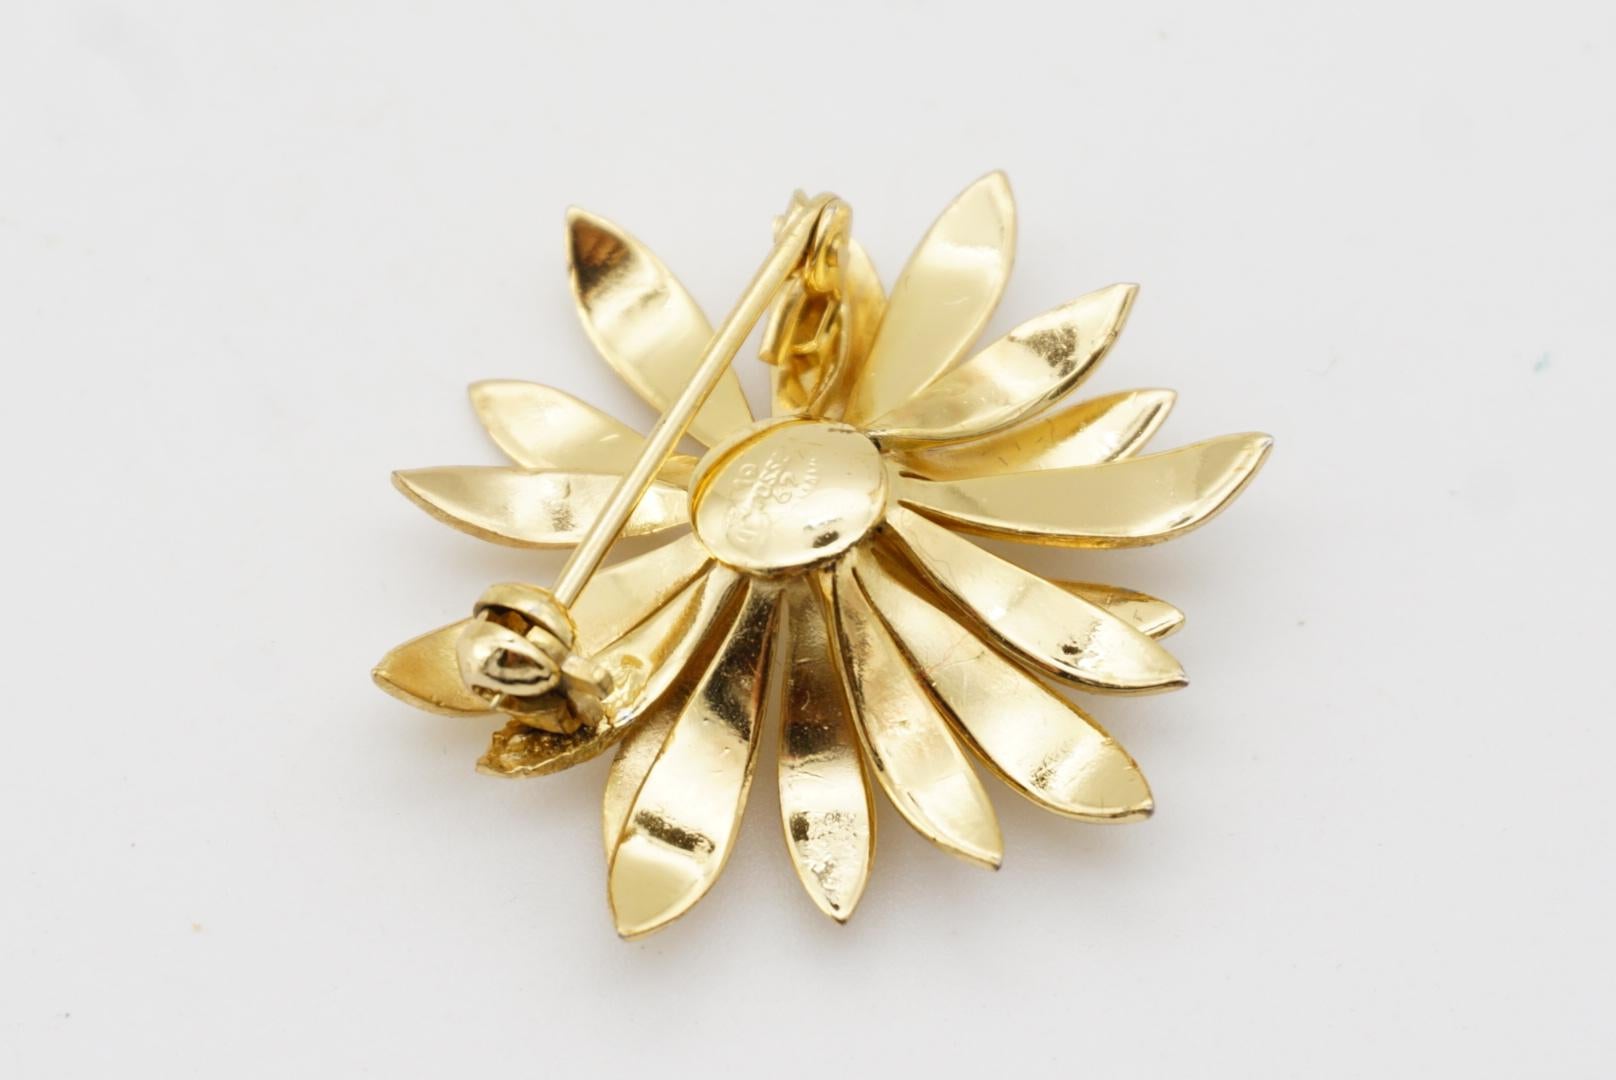 Christian Dior GROSSE 1967 Vintage Daisy Flower Blossom White Pearl Gold Brooch For Sale 7